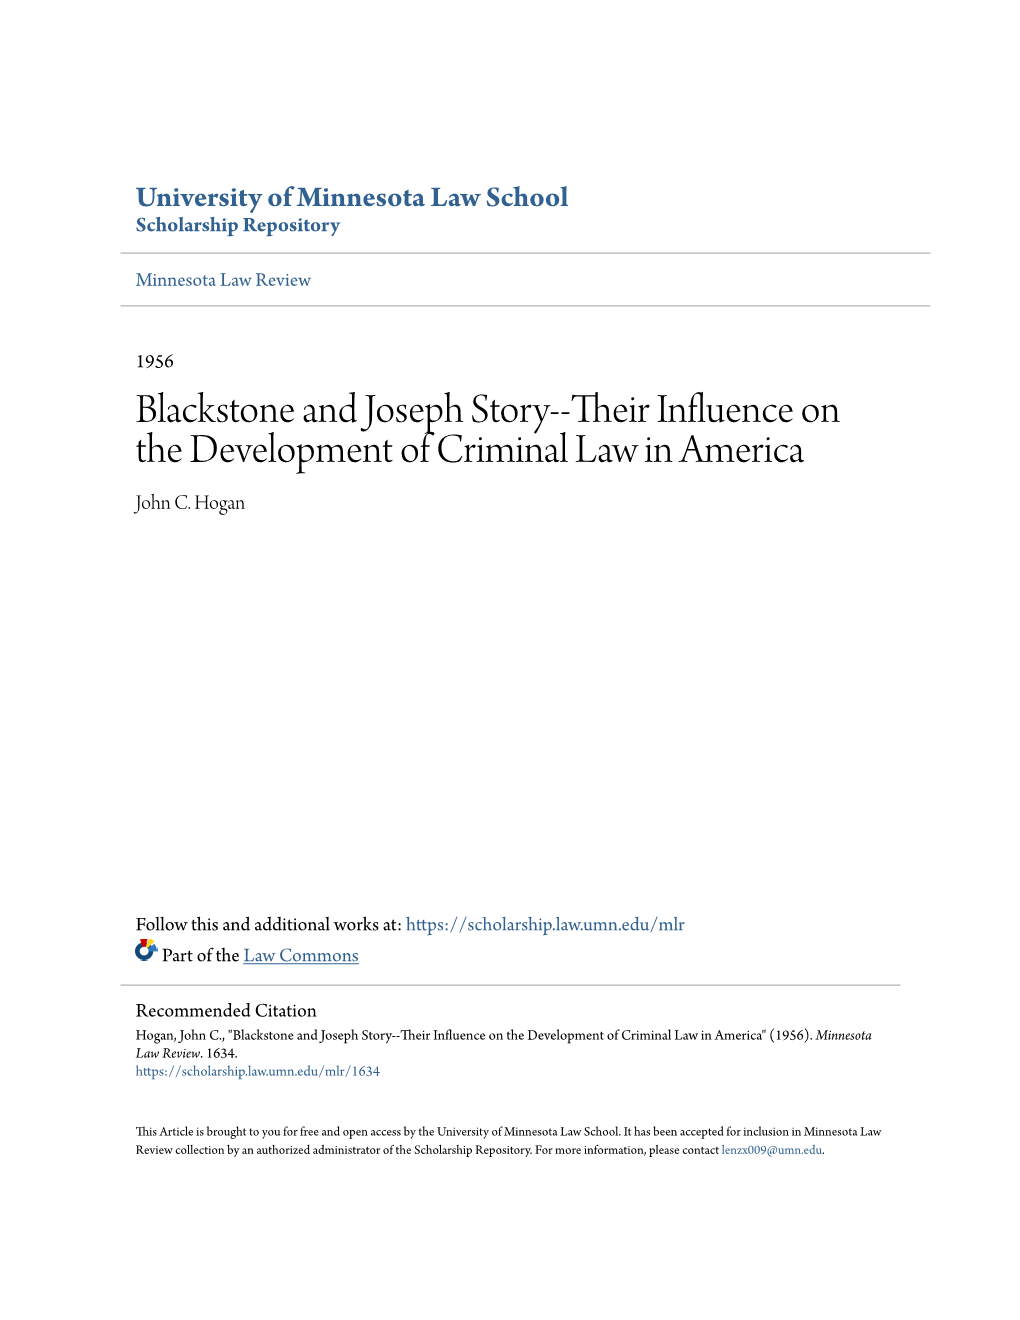 Blackstone and Joseph Story--Their Nfluei Nce on the Development of Criminal Law in America John C